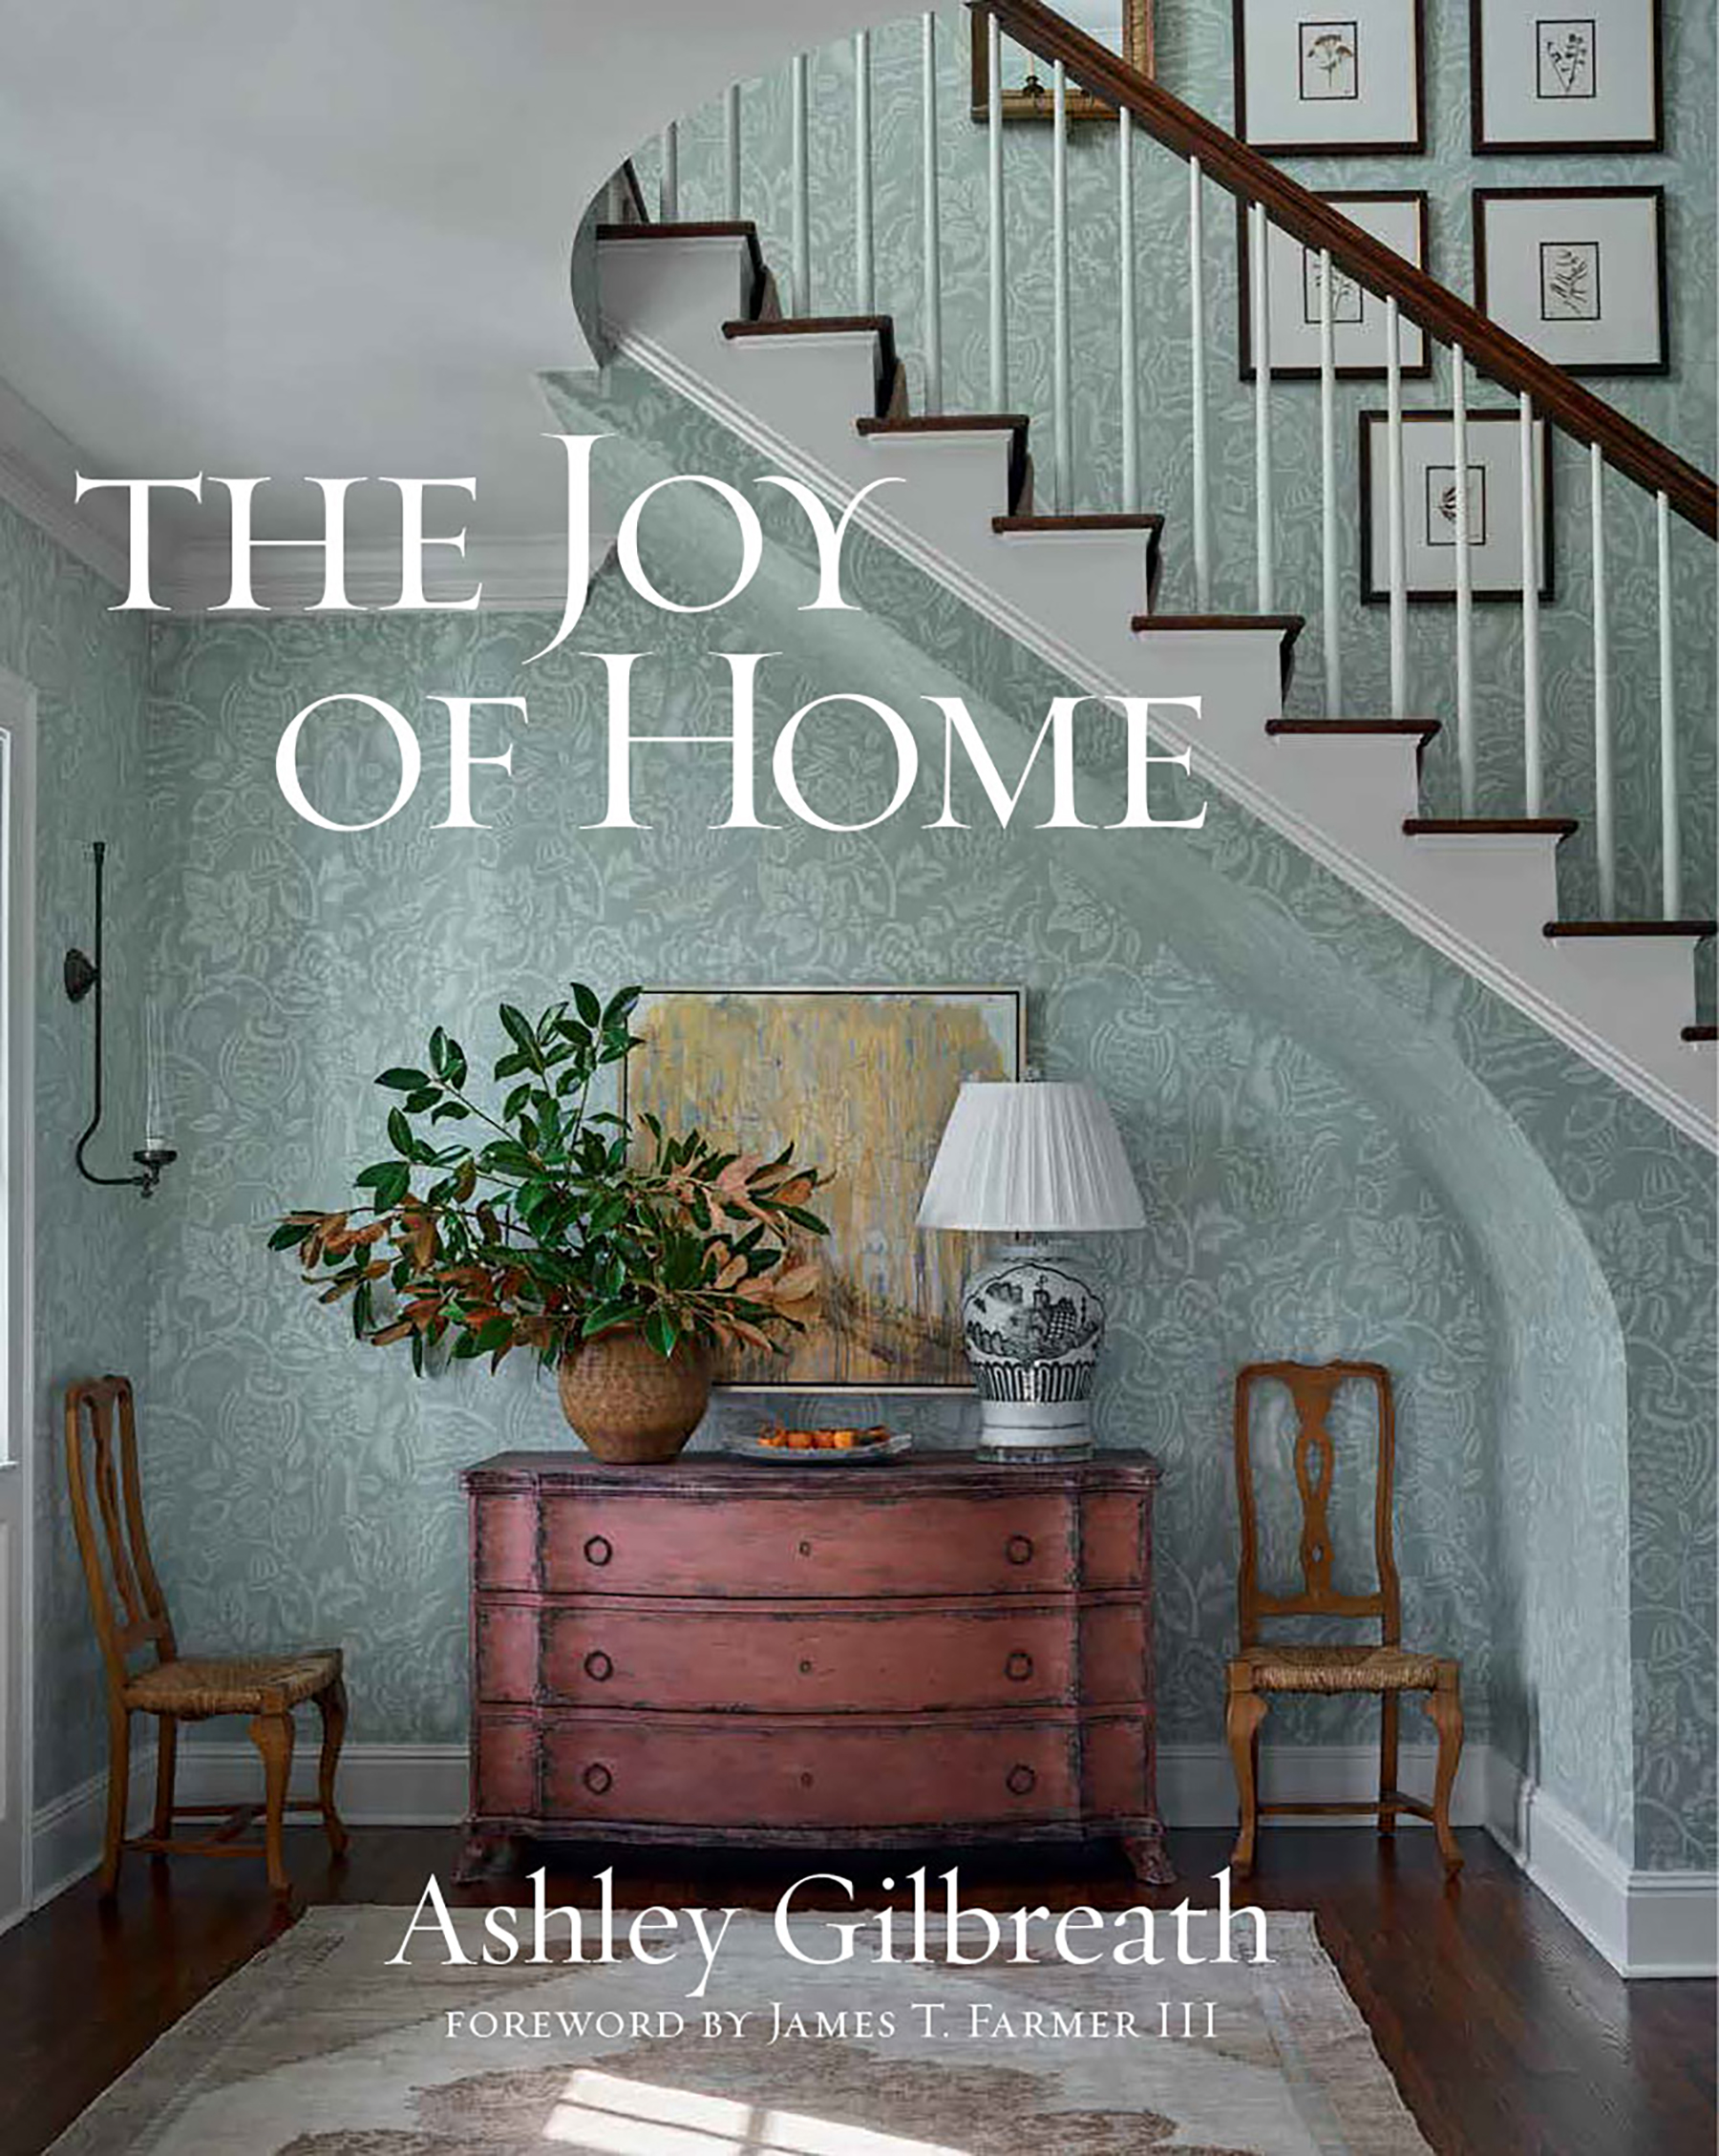 The Joy of Home book cover by Ashley Gilbreath